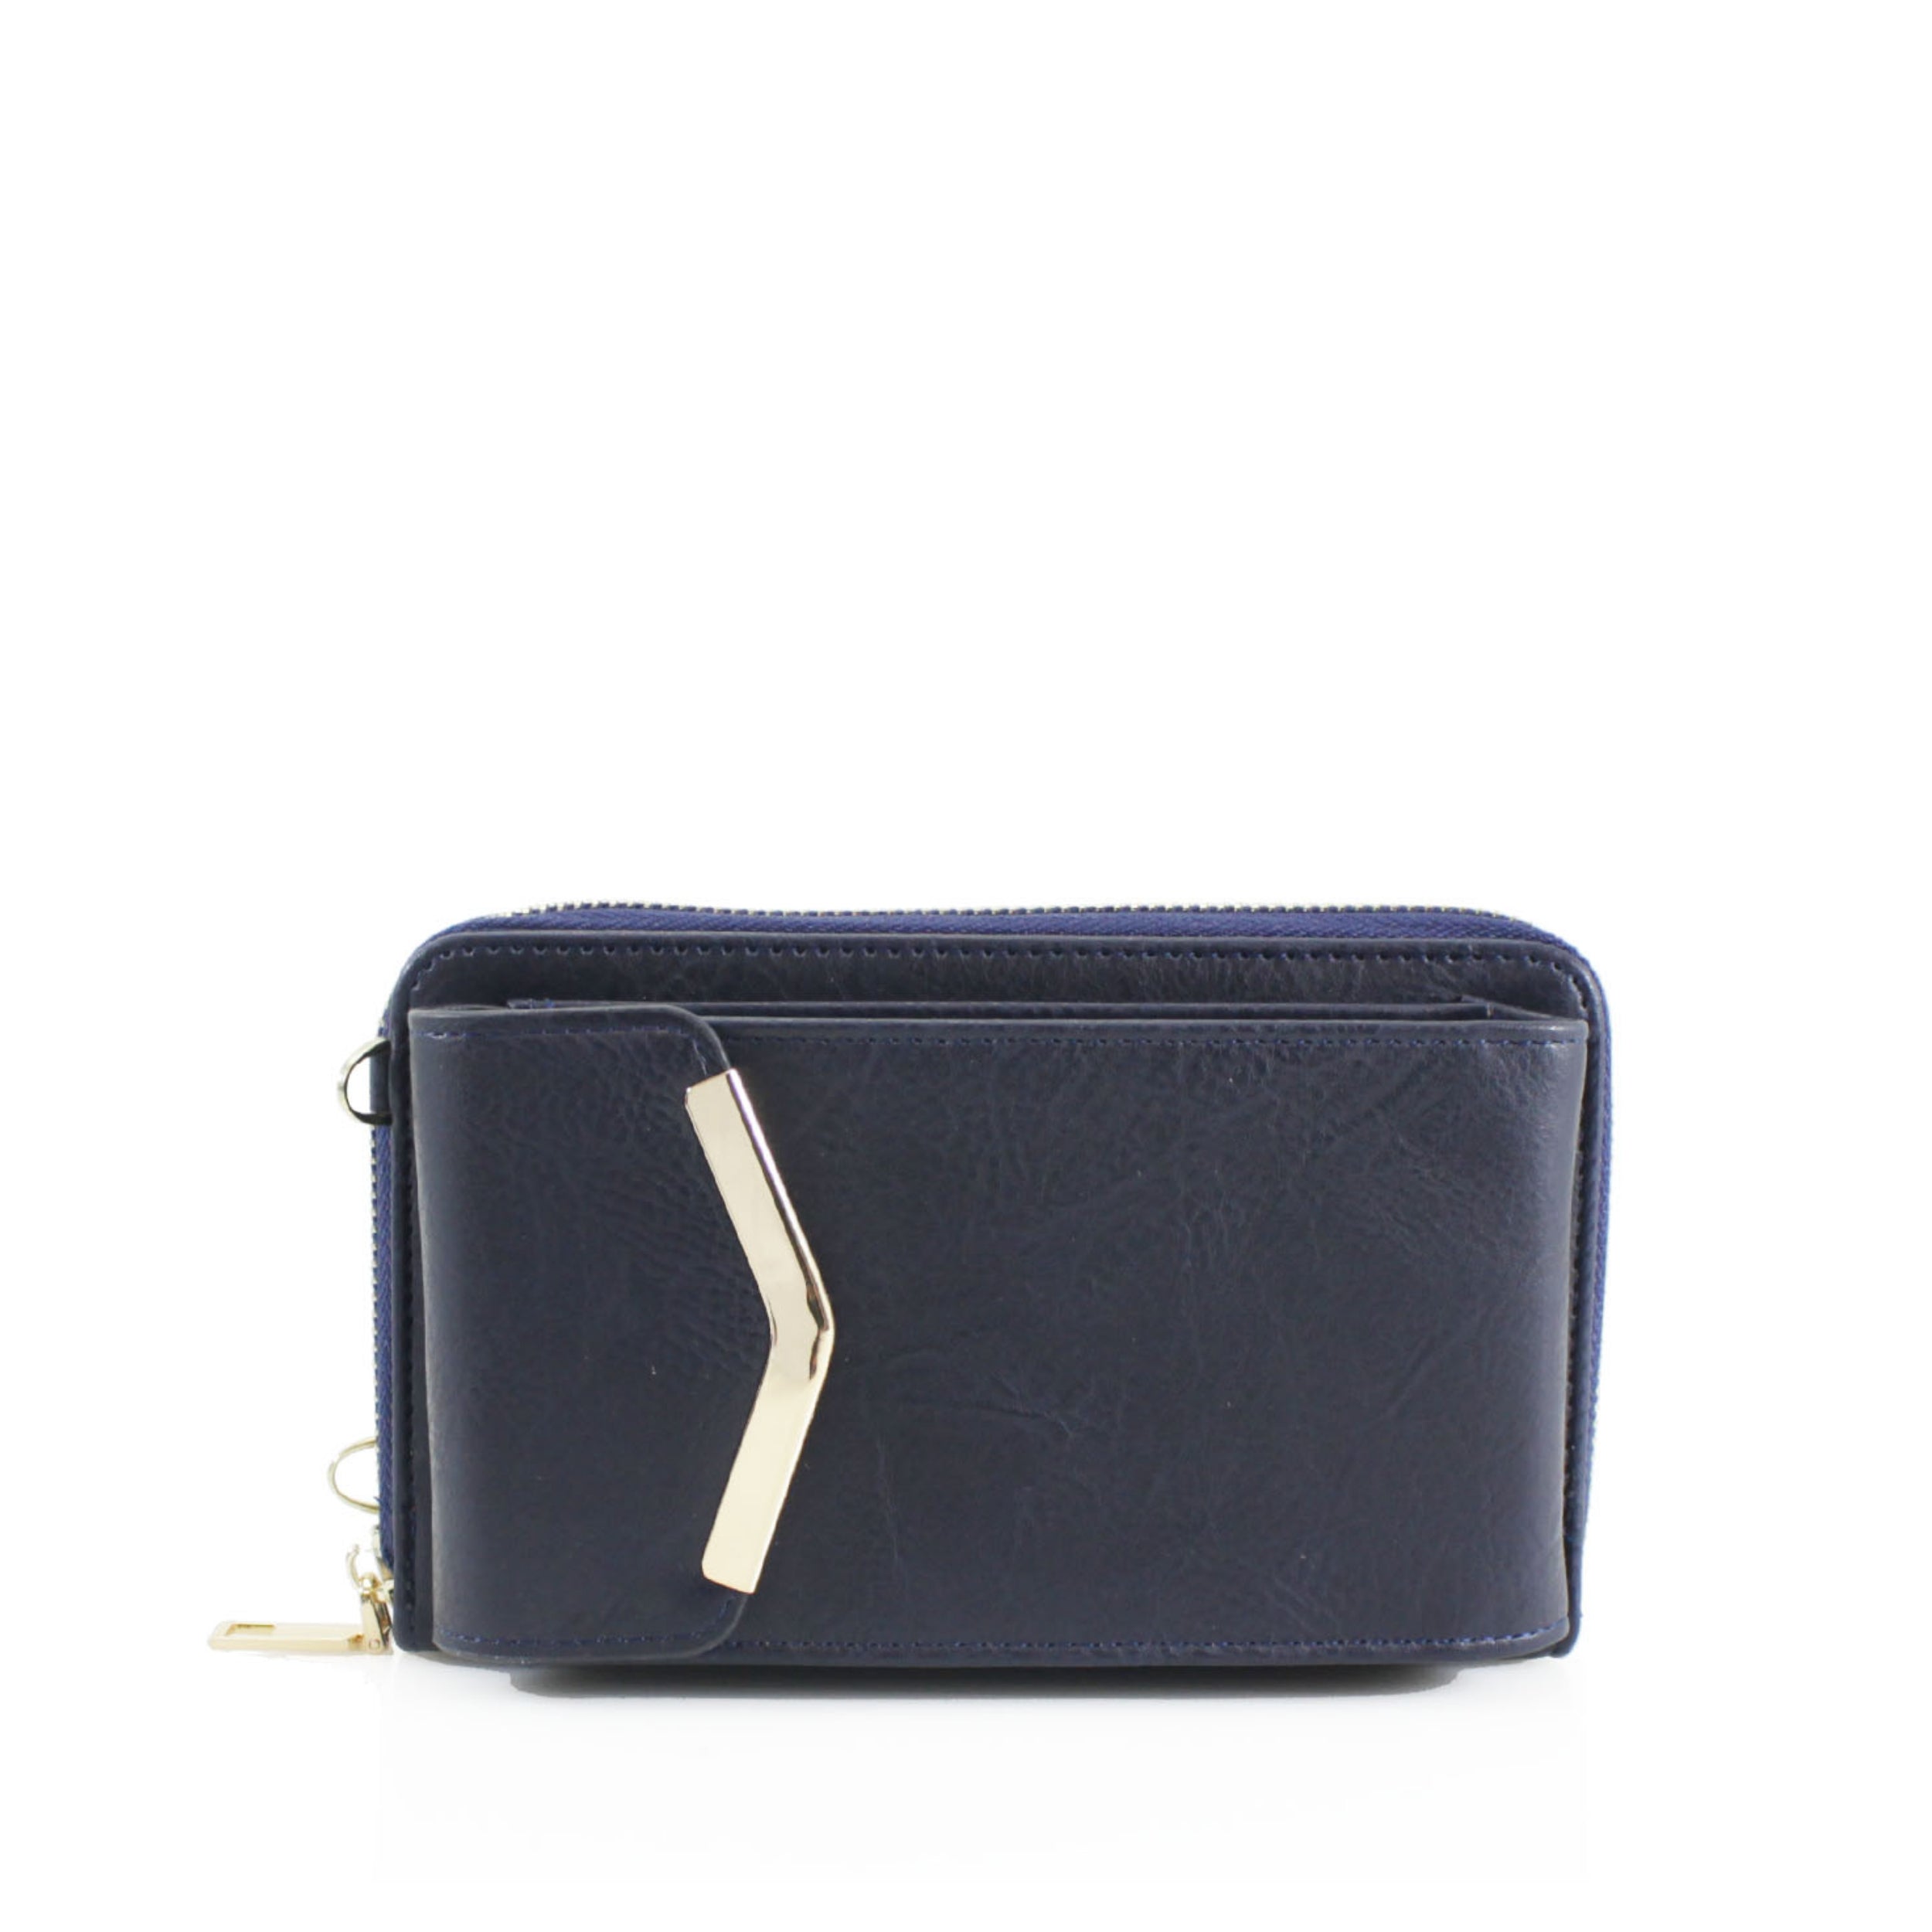 Craze London Crossbody Bags with Card Slots